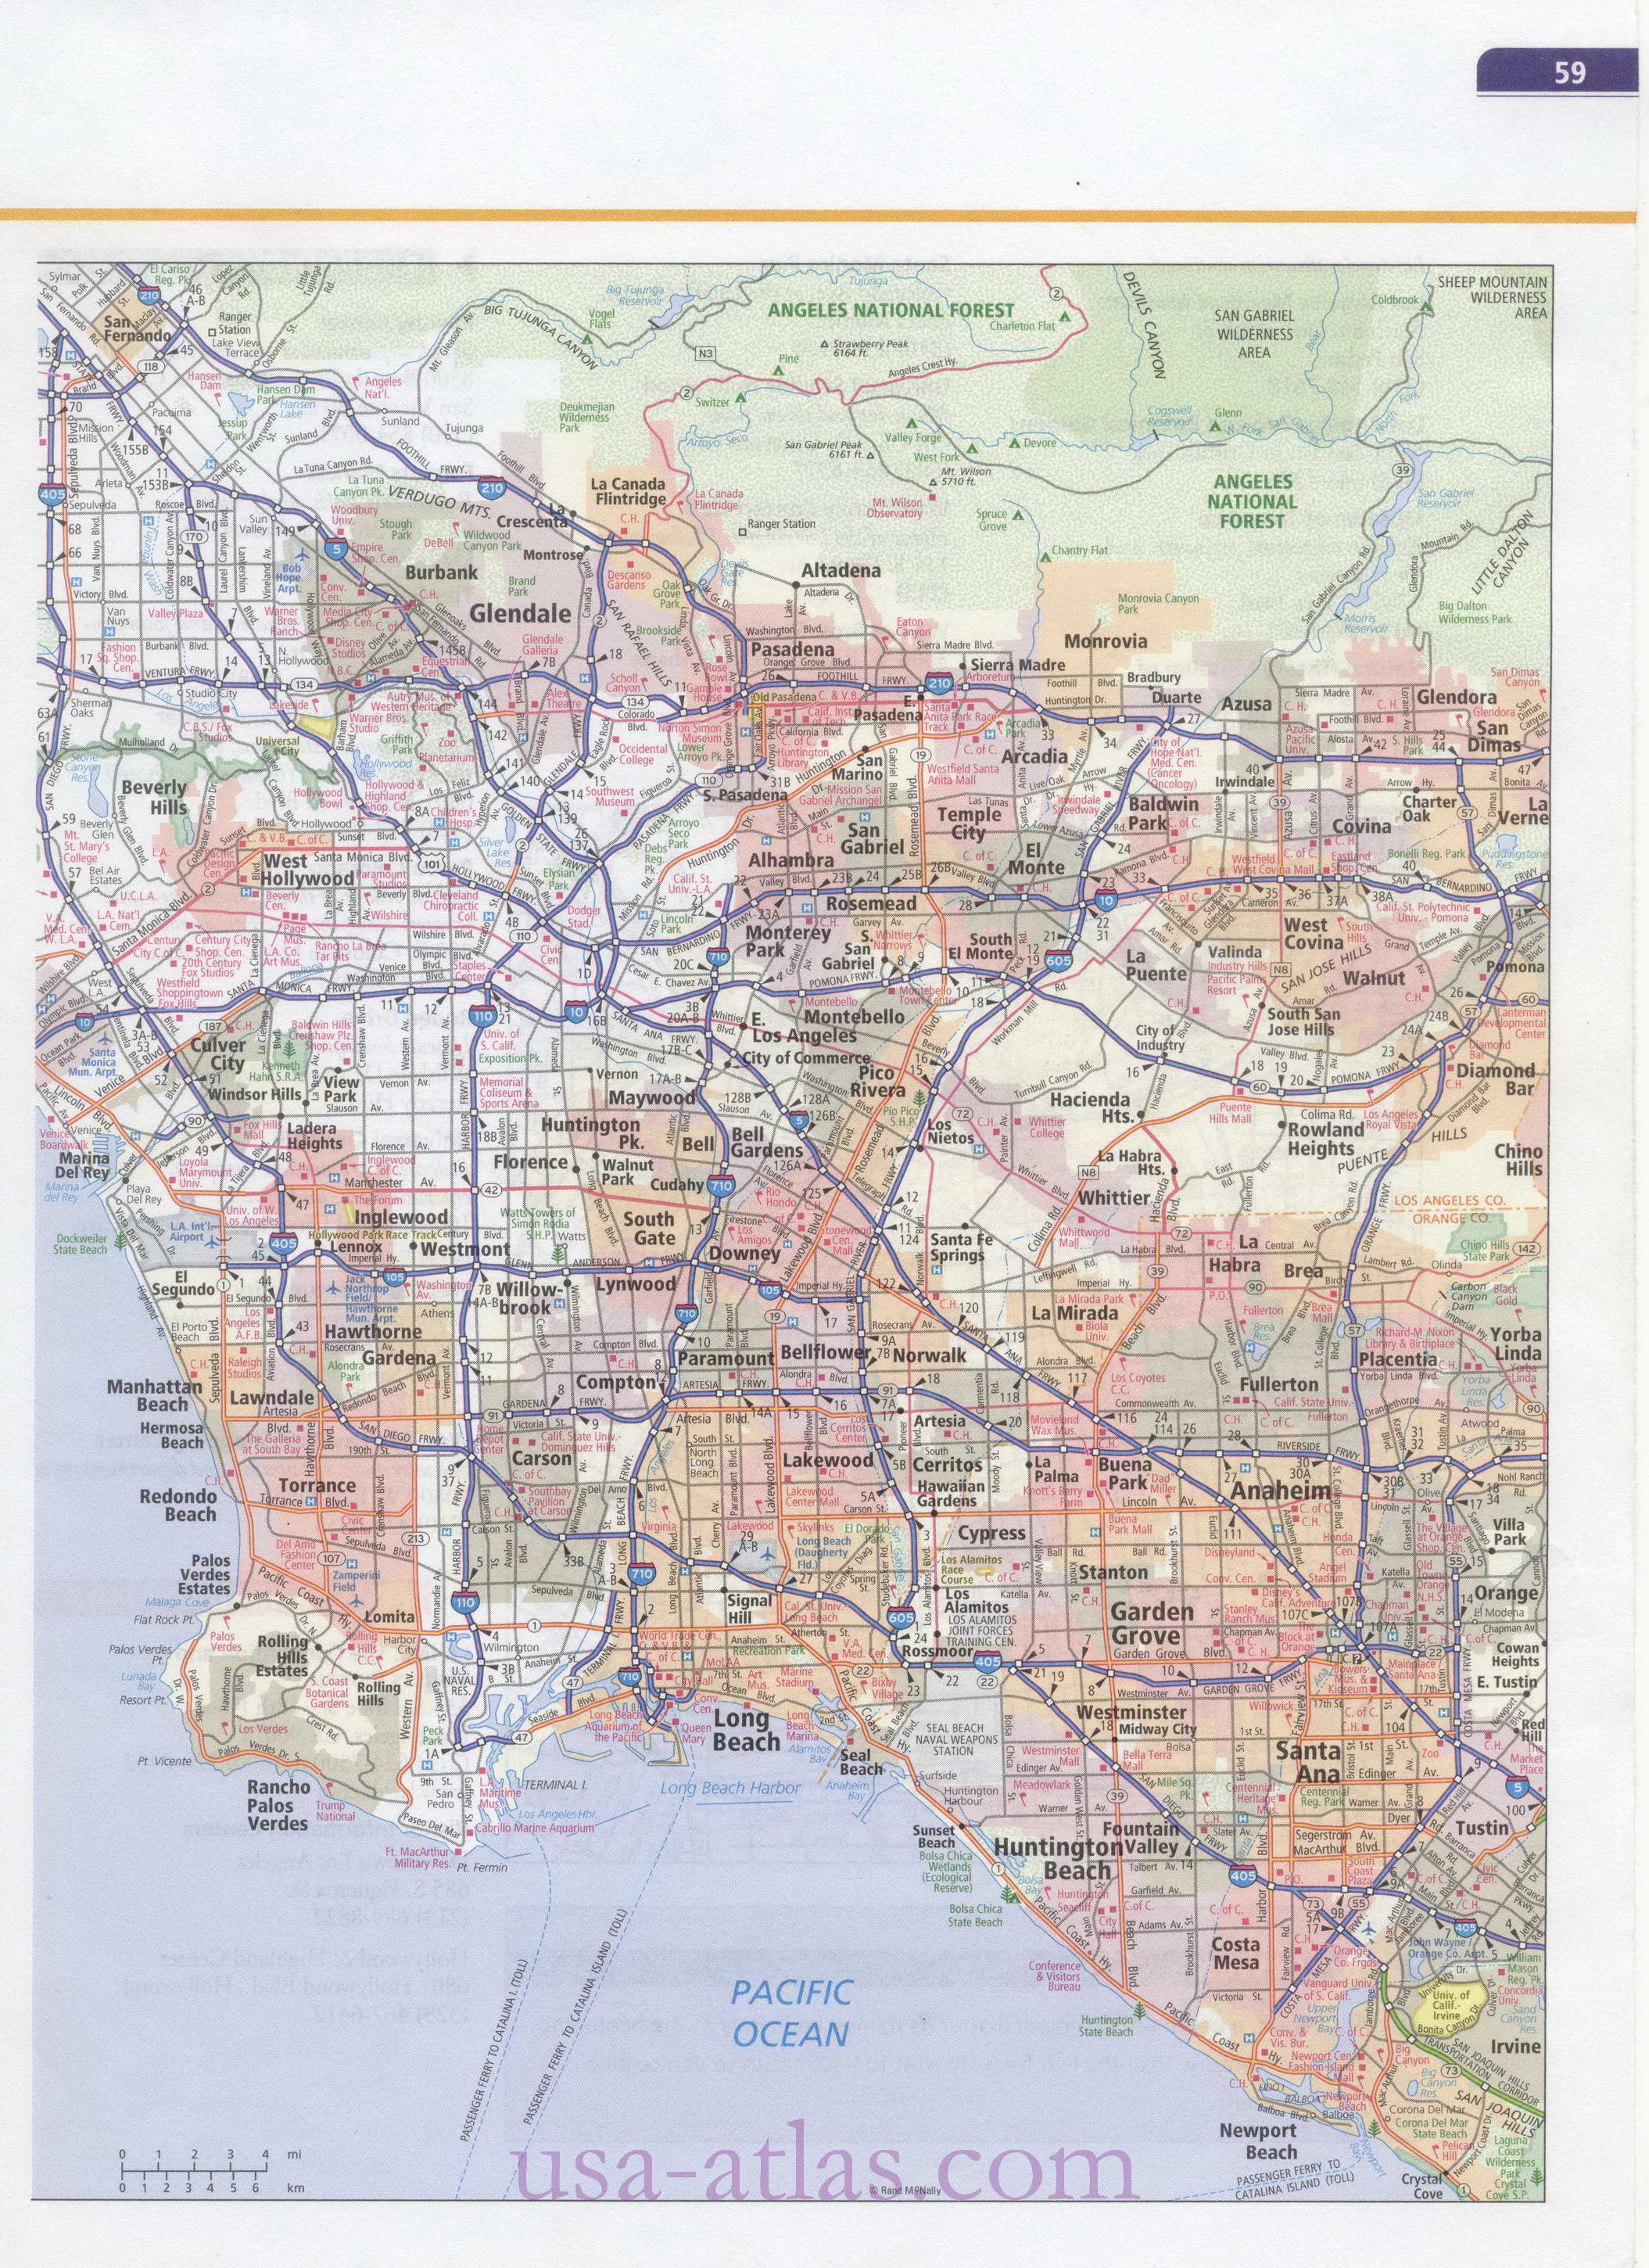 Los Angeles Map. Detailed Street Map Of Los Angeles, California - California Street Map